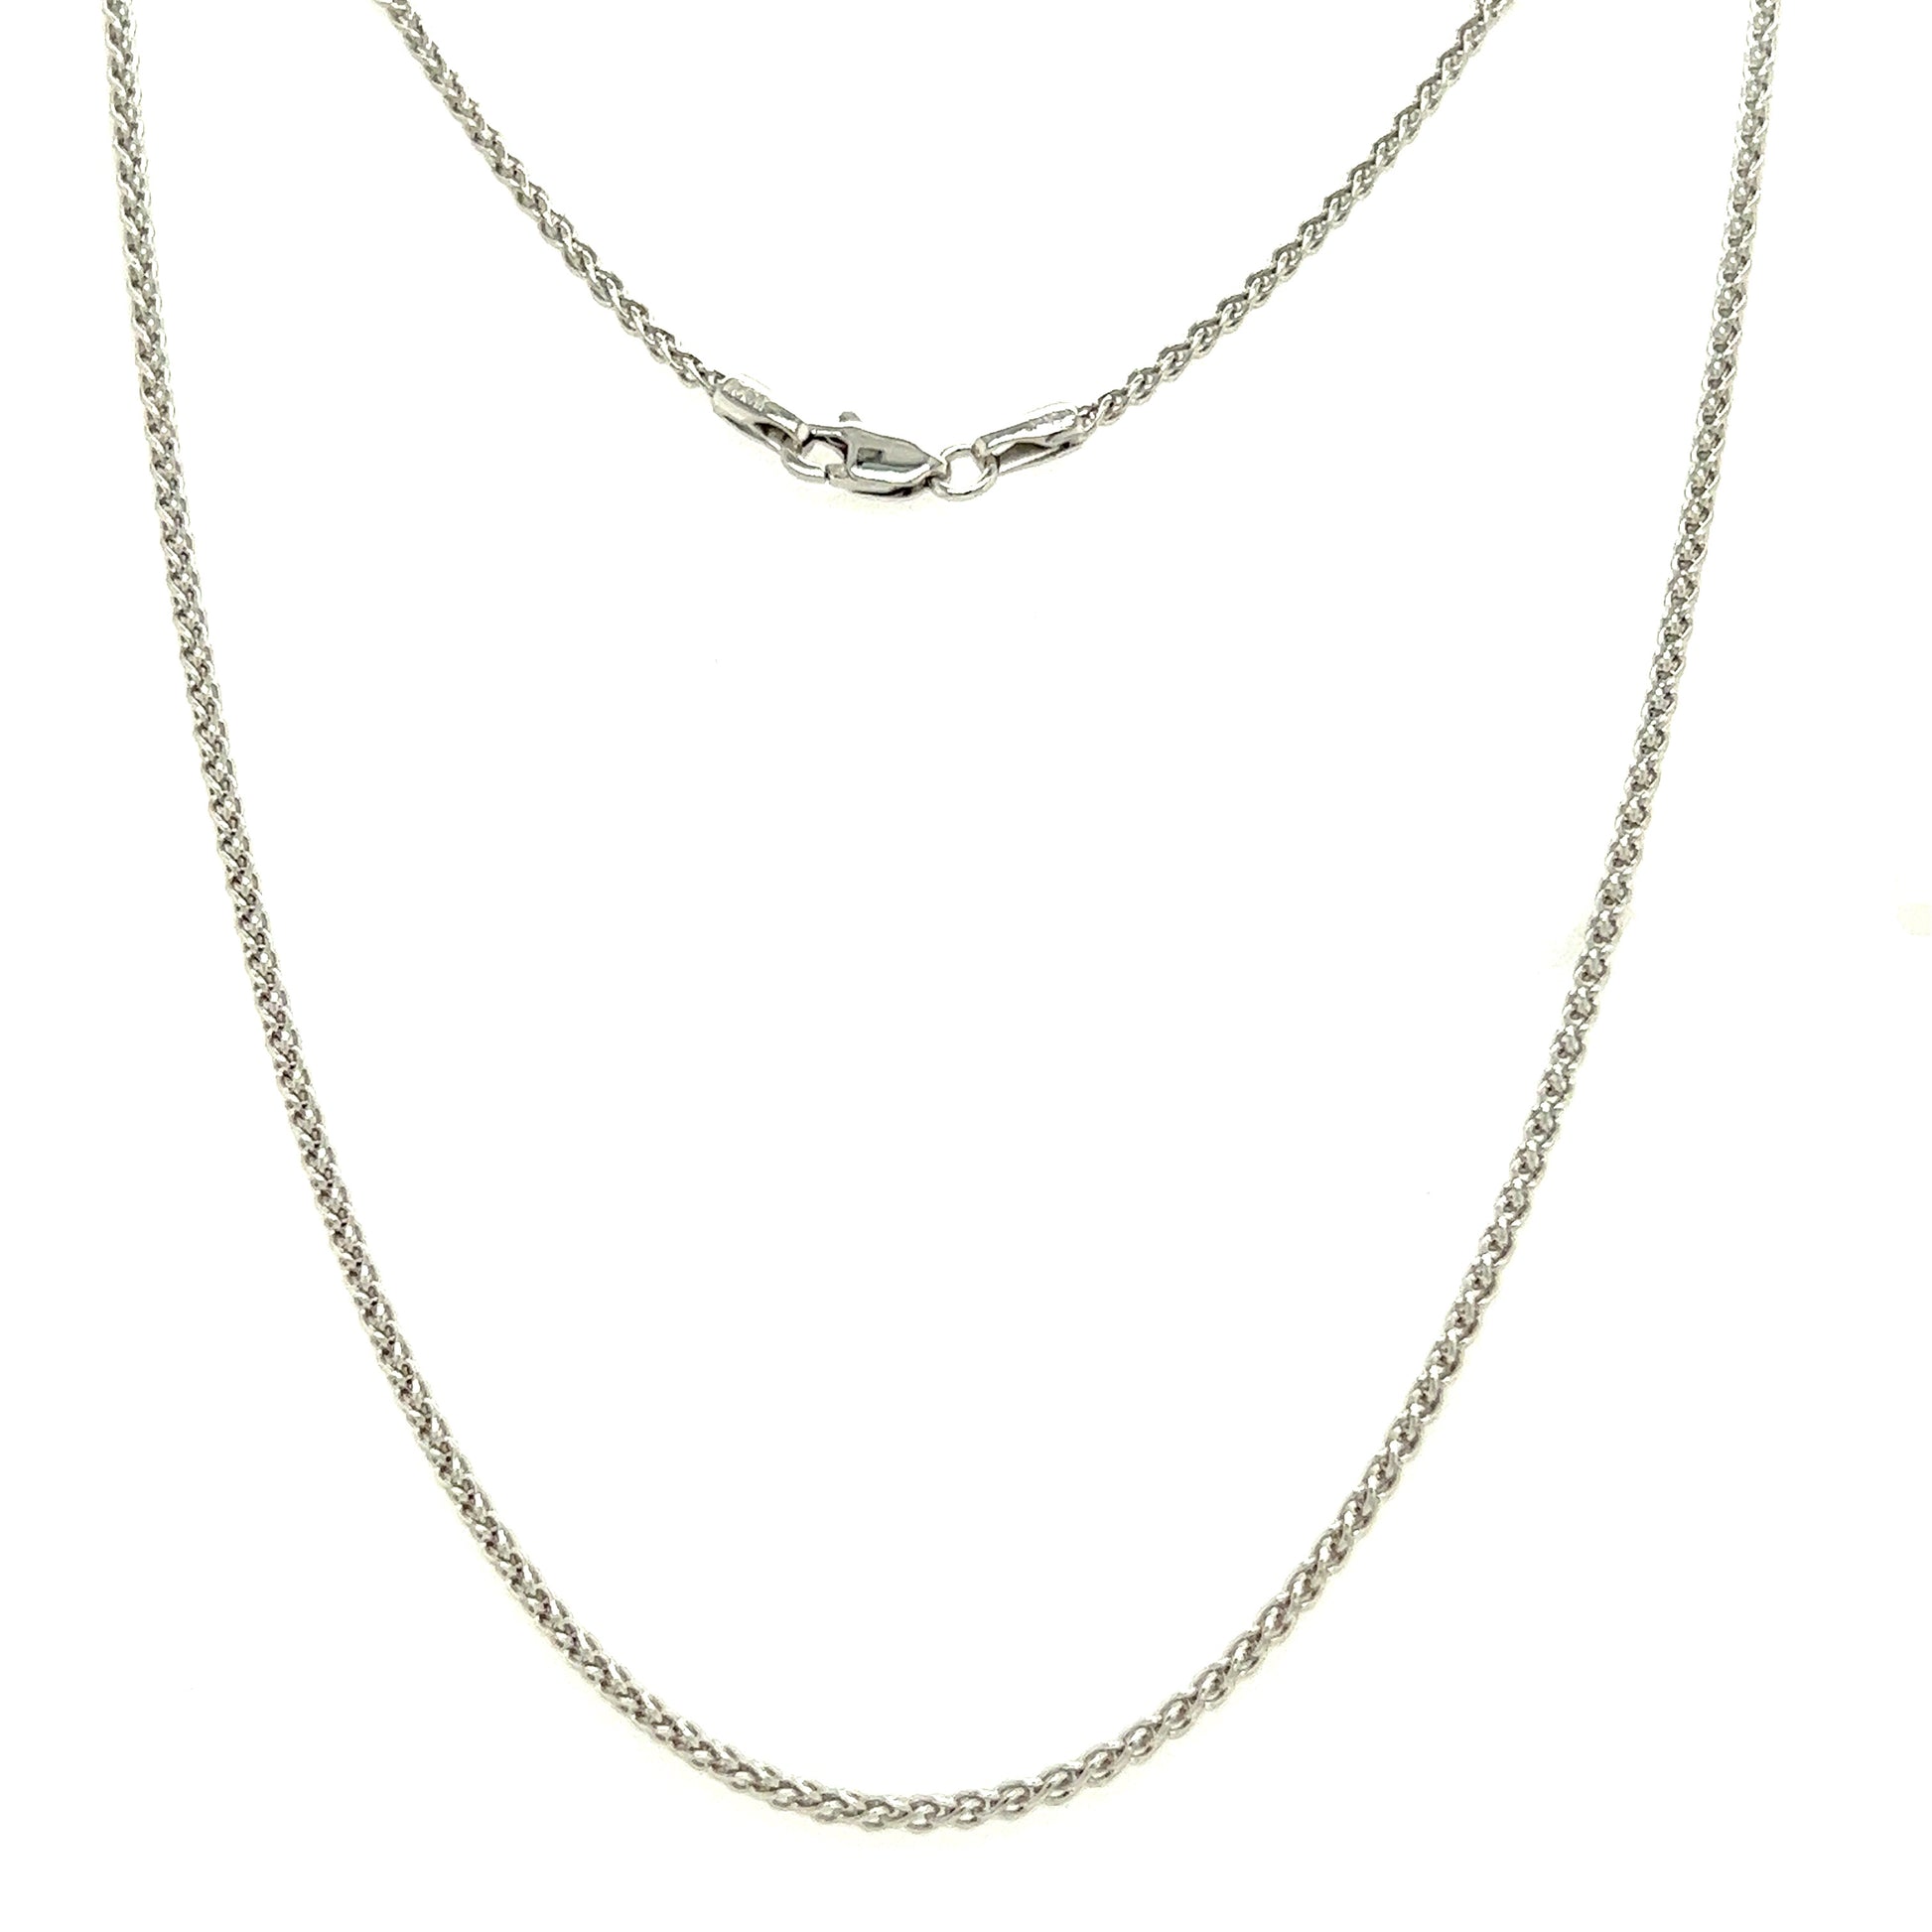 Wheat Chain 1.65mm with 18in of Length in 14K White Gold Full Chain View